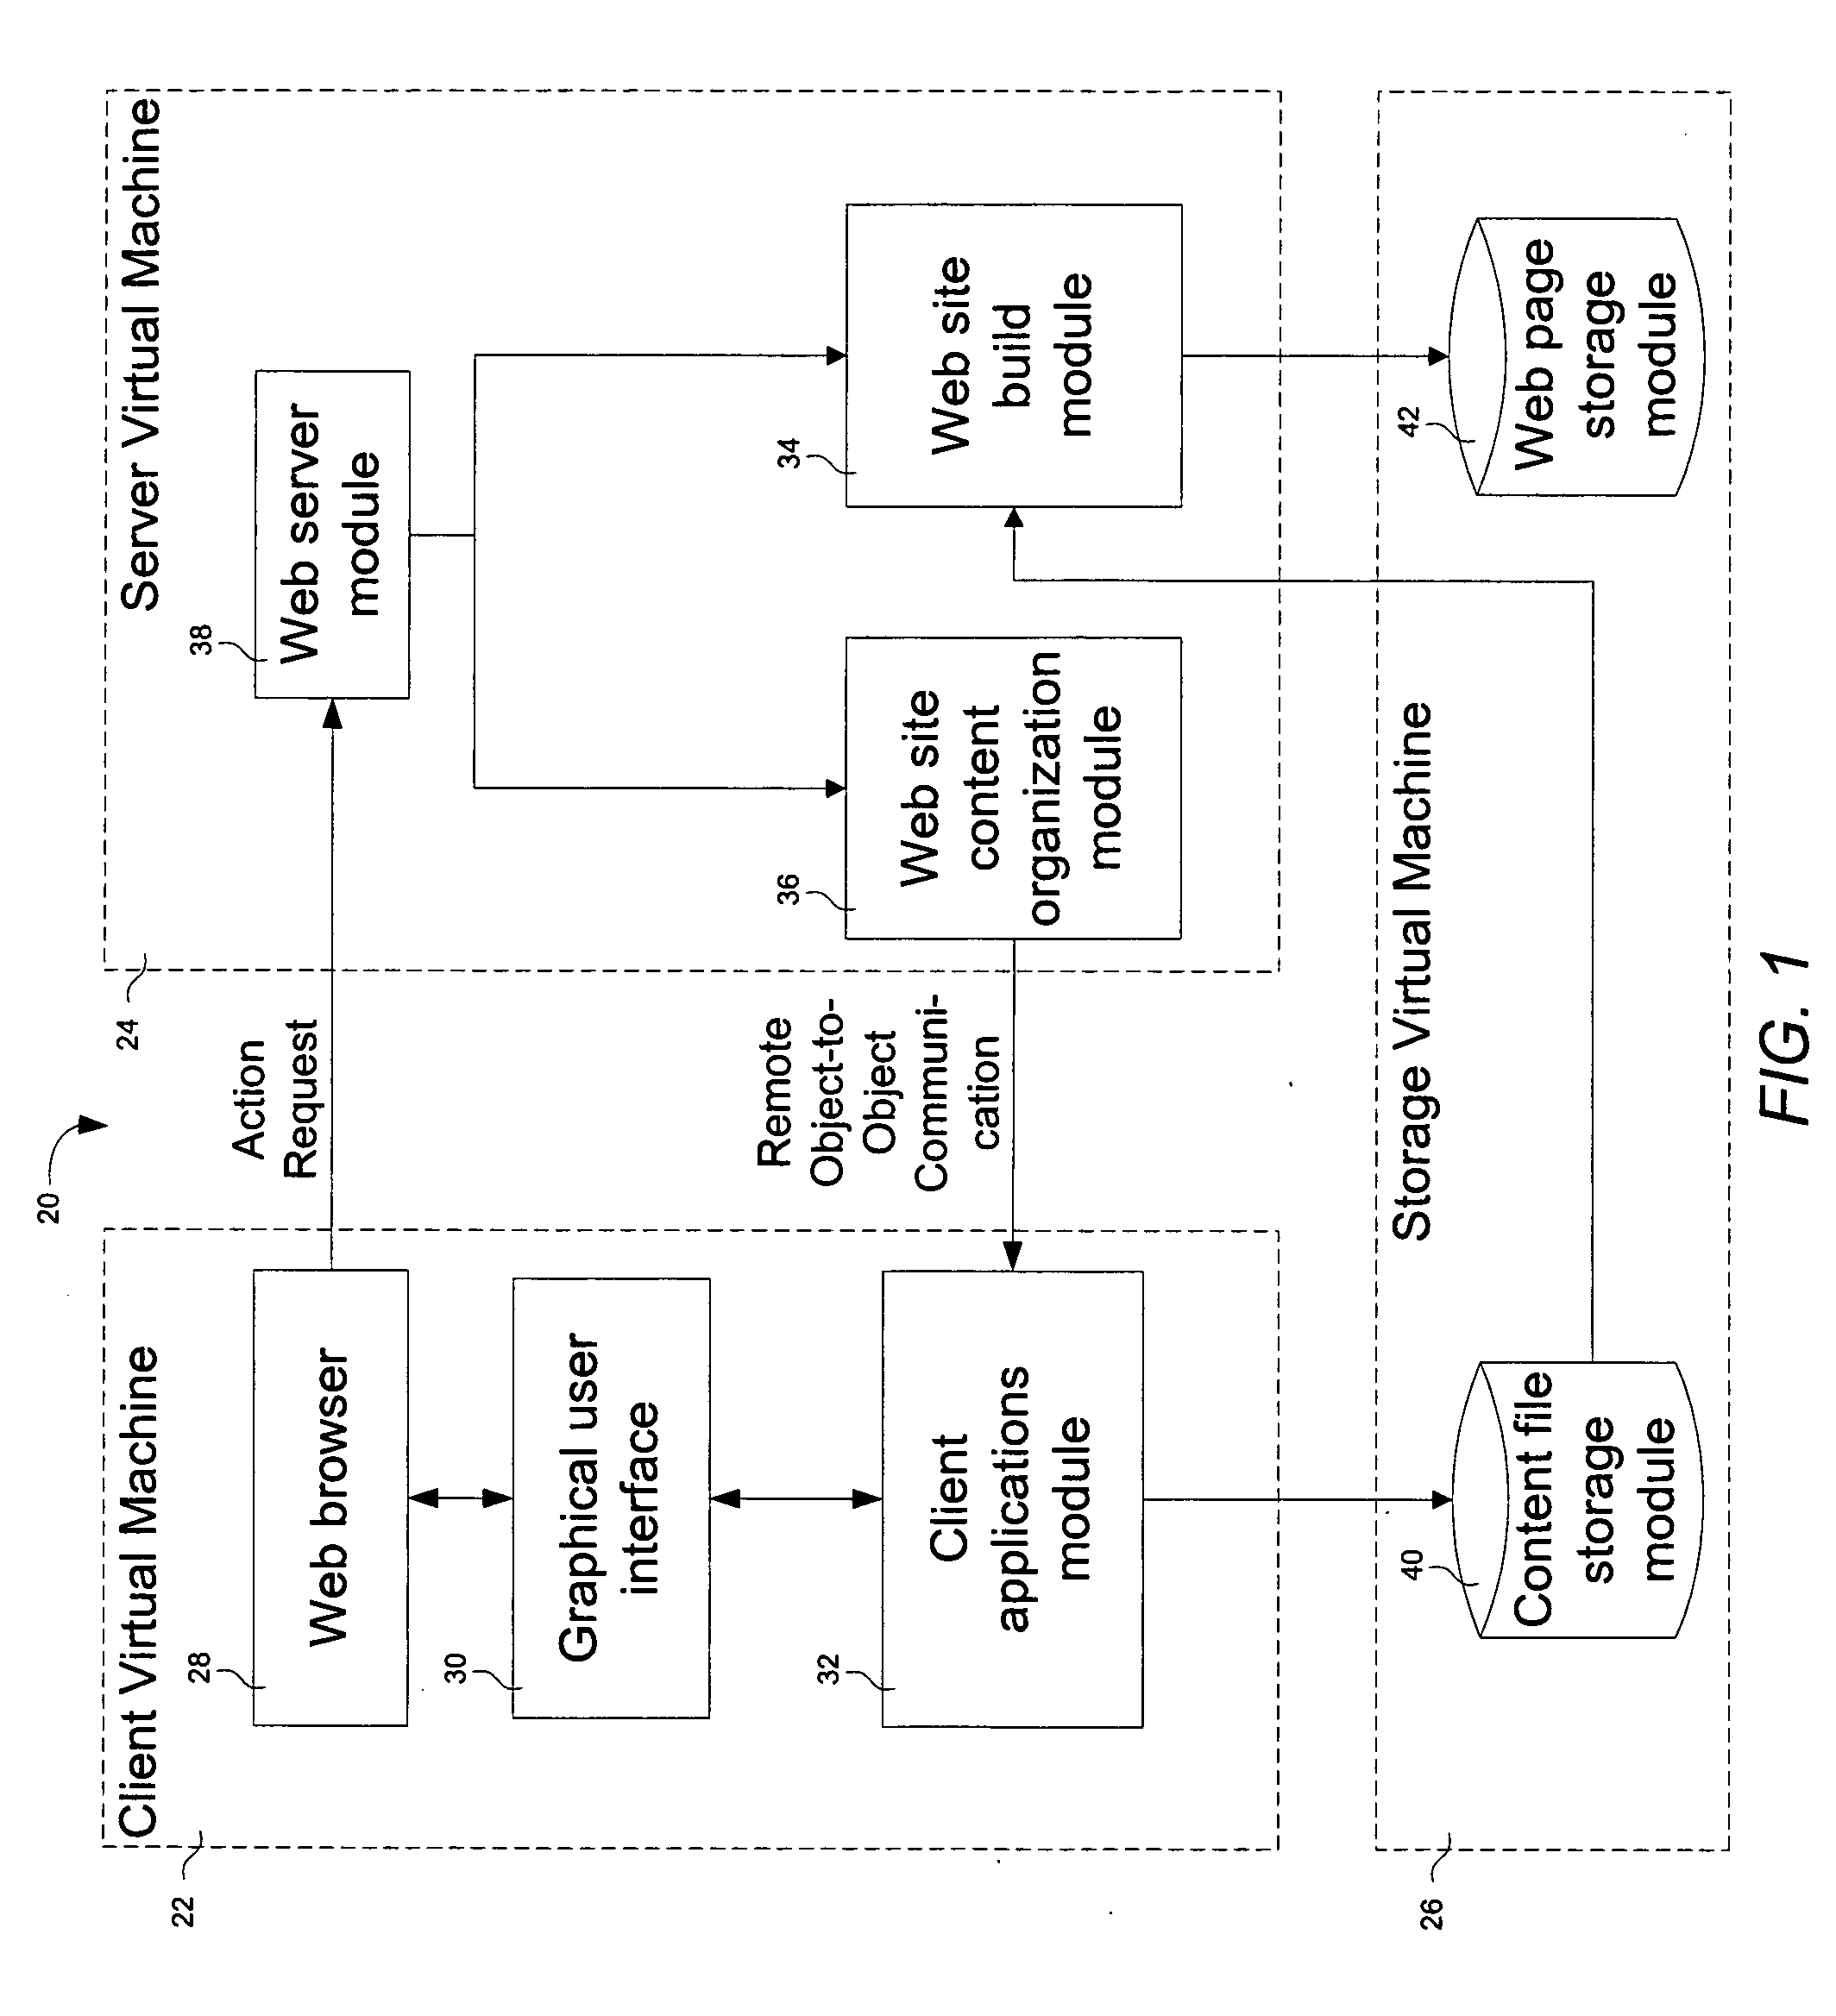 Browser-based web site generation system and method